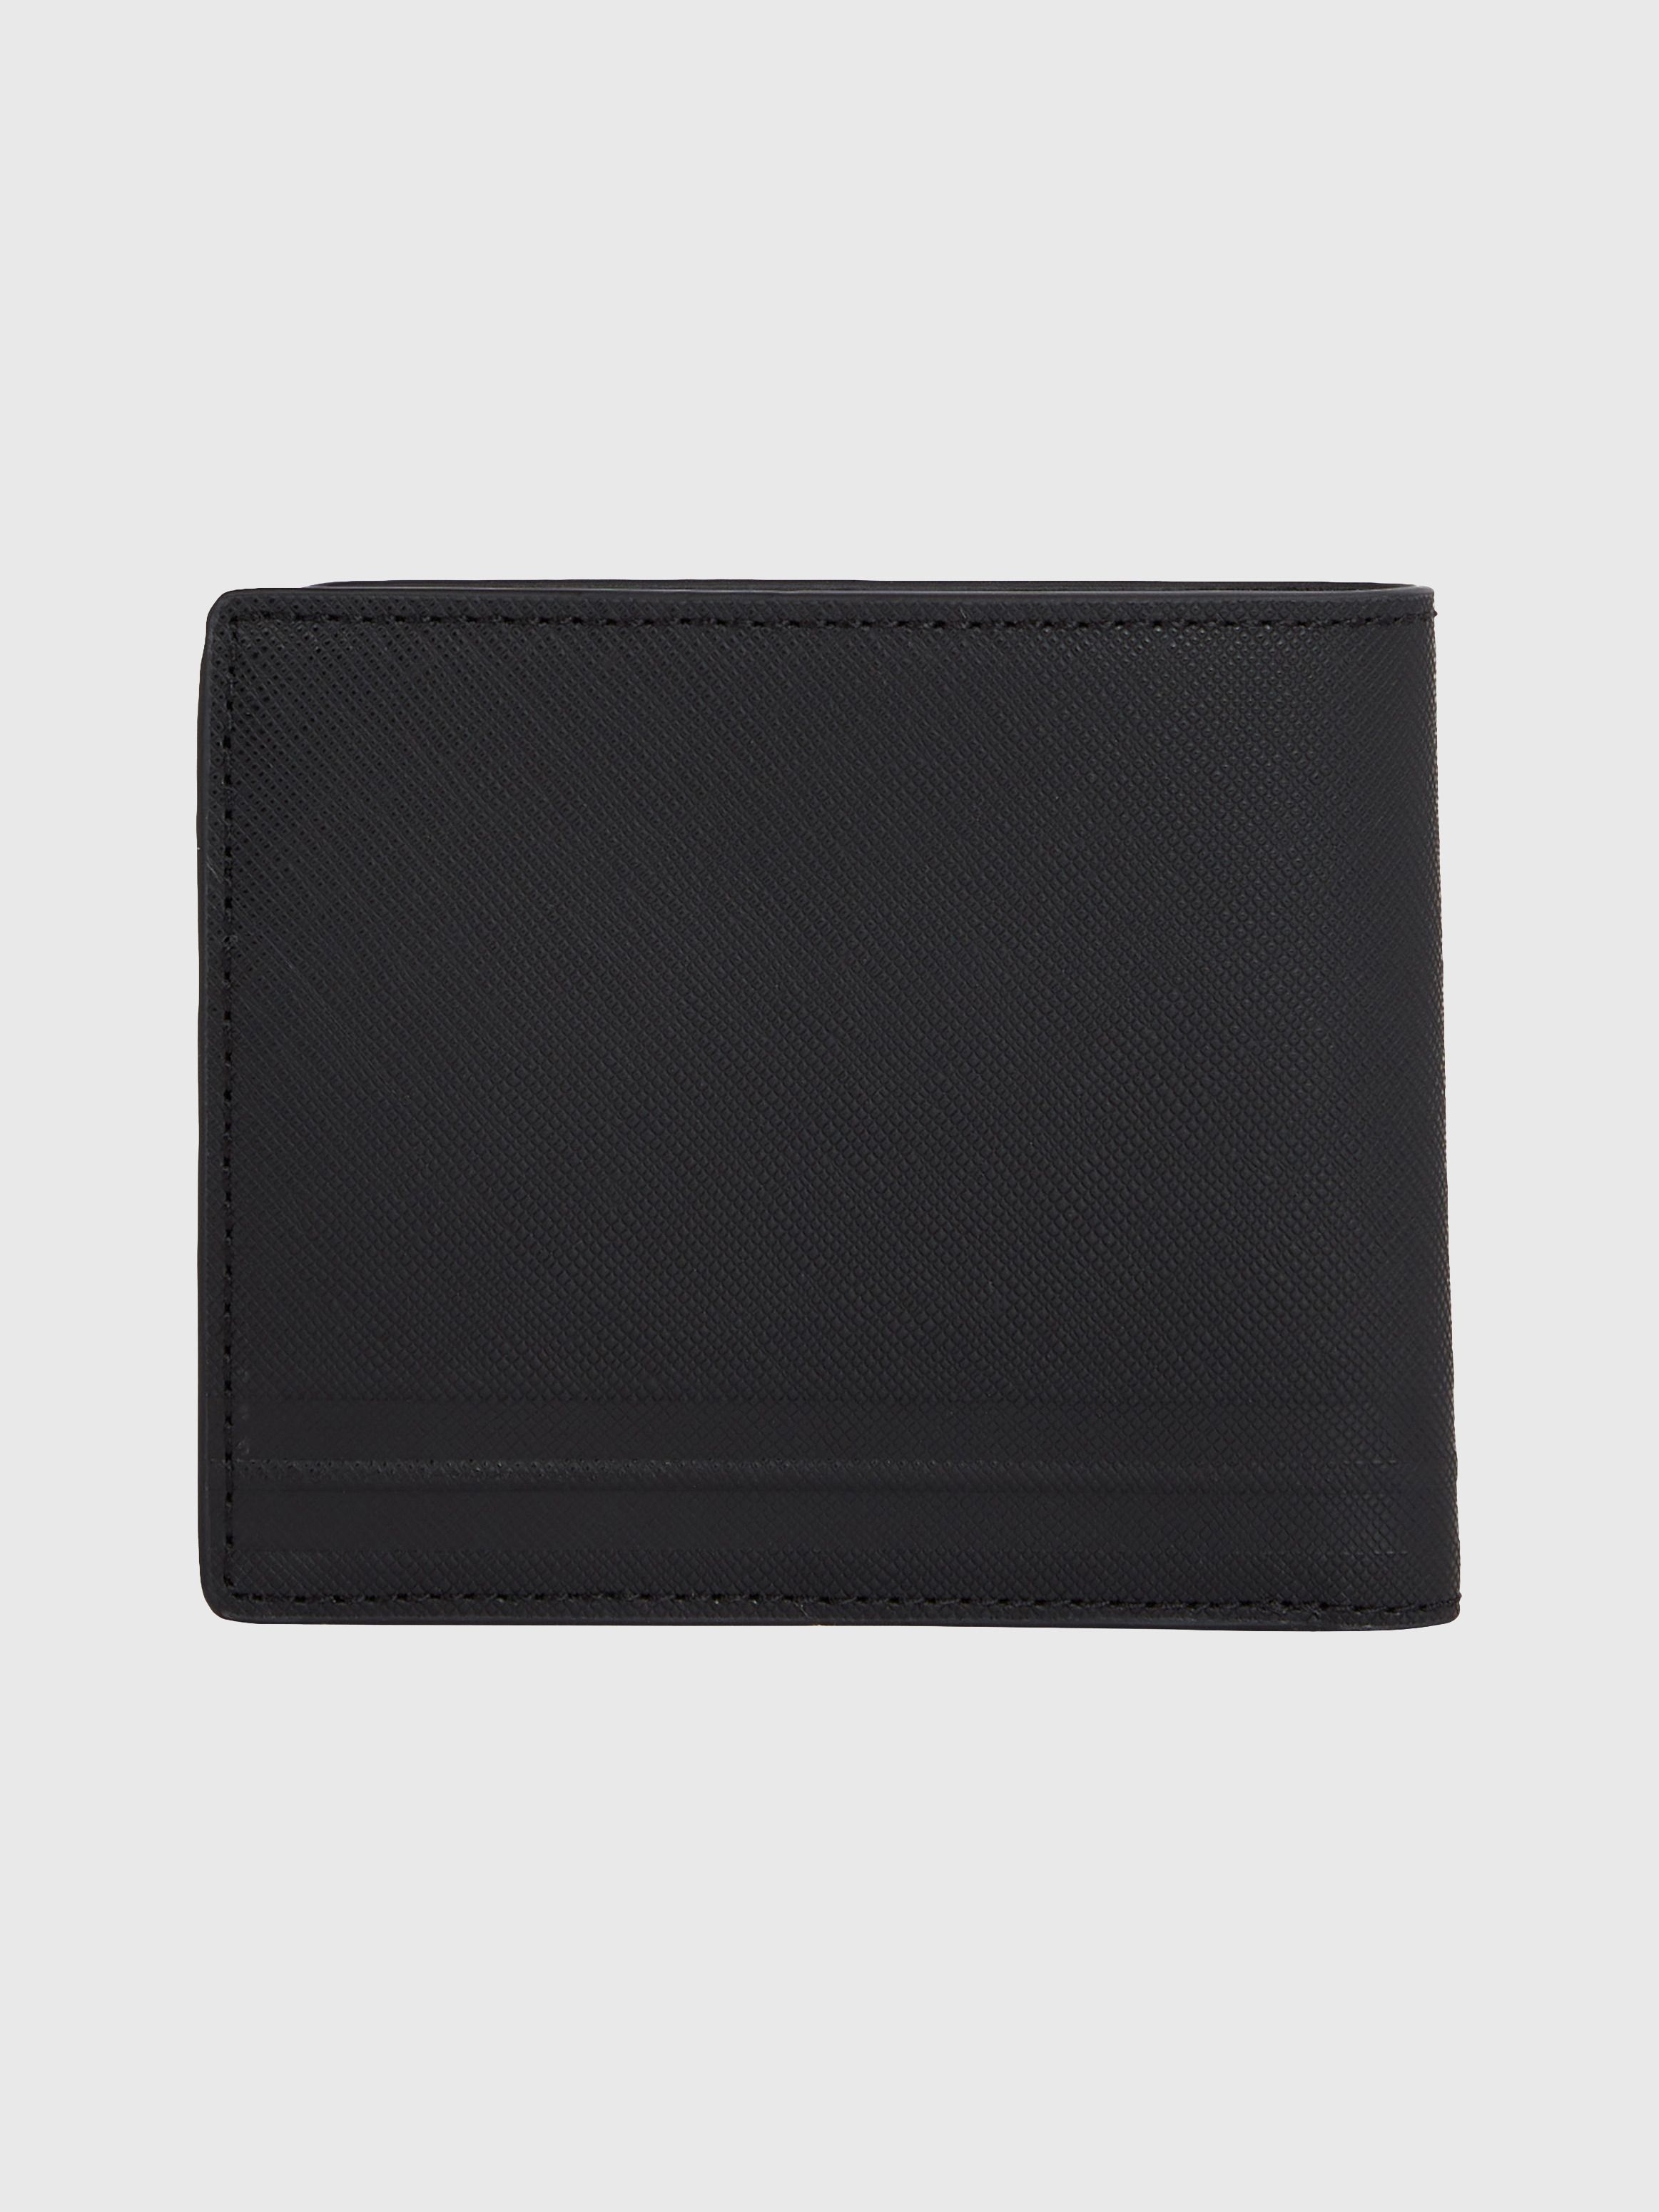 TH Business Leather Card Coin Wallet | Tommy Hilfiger